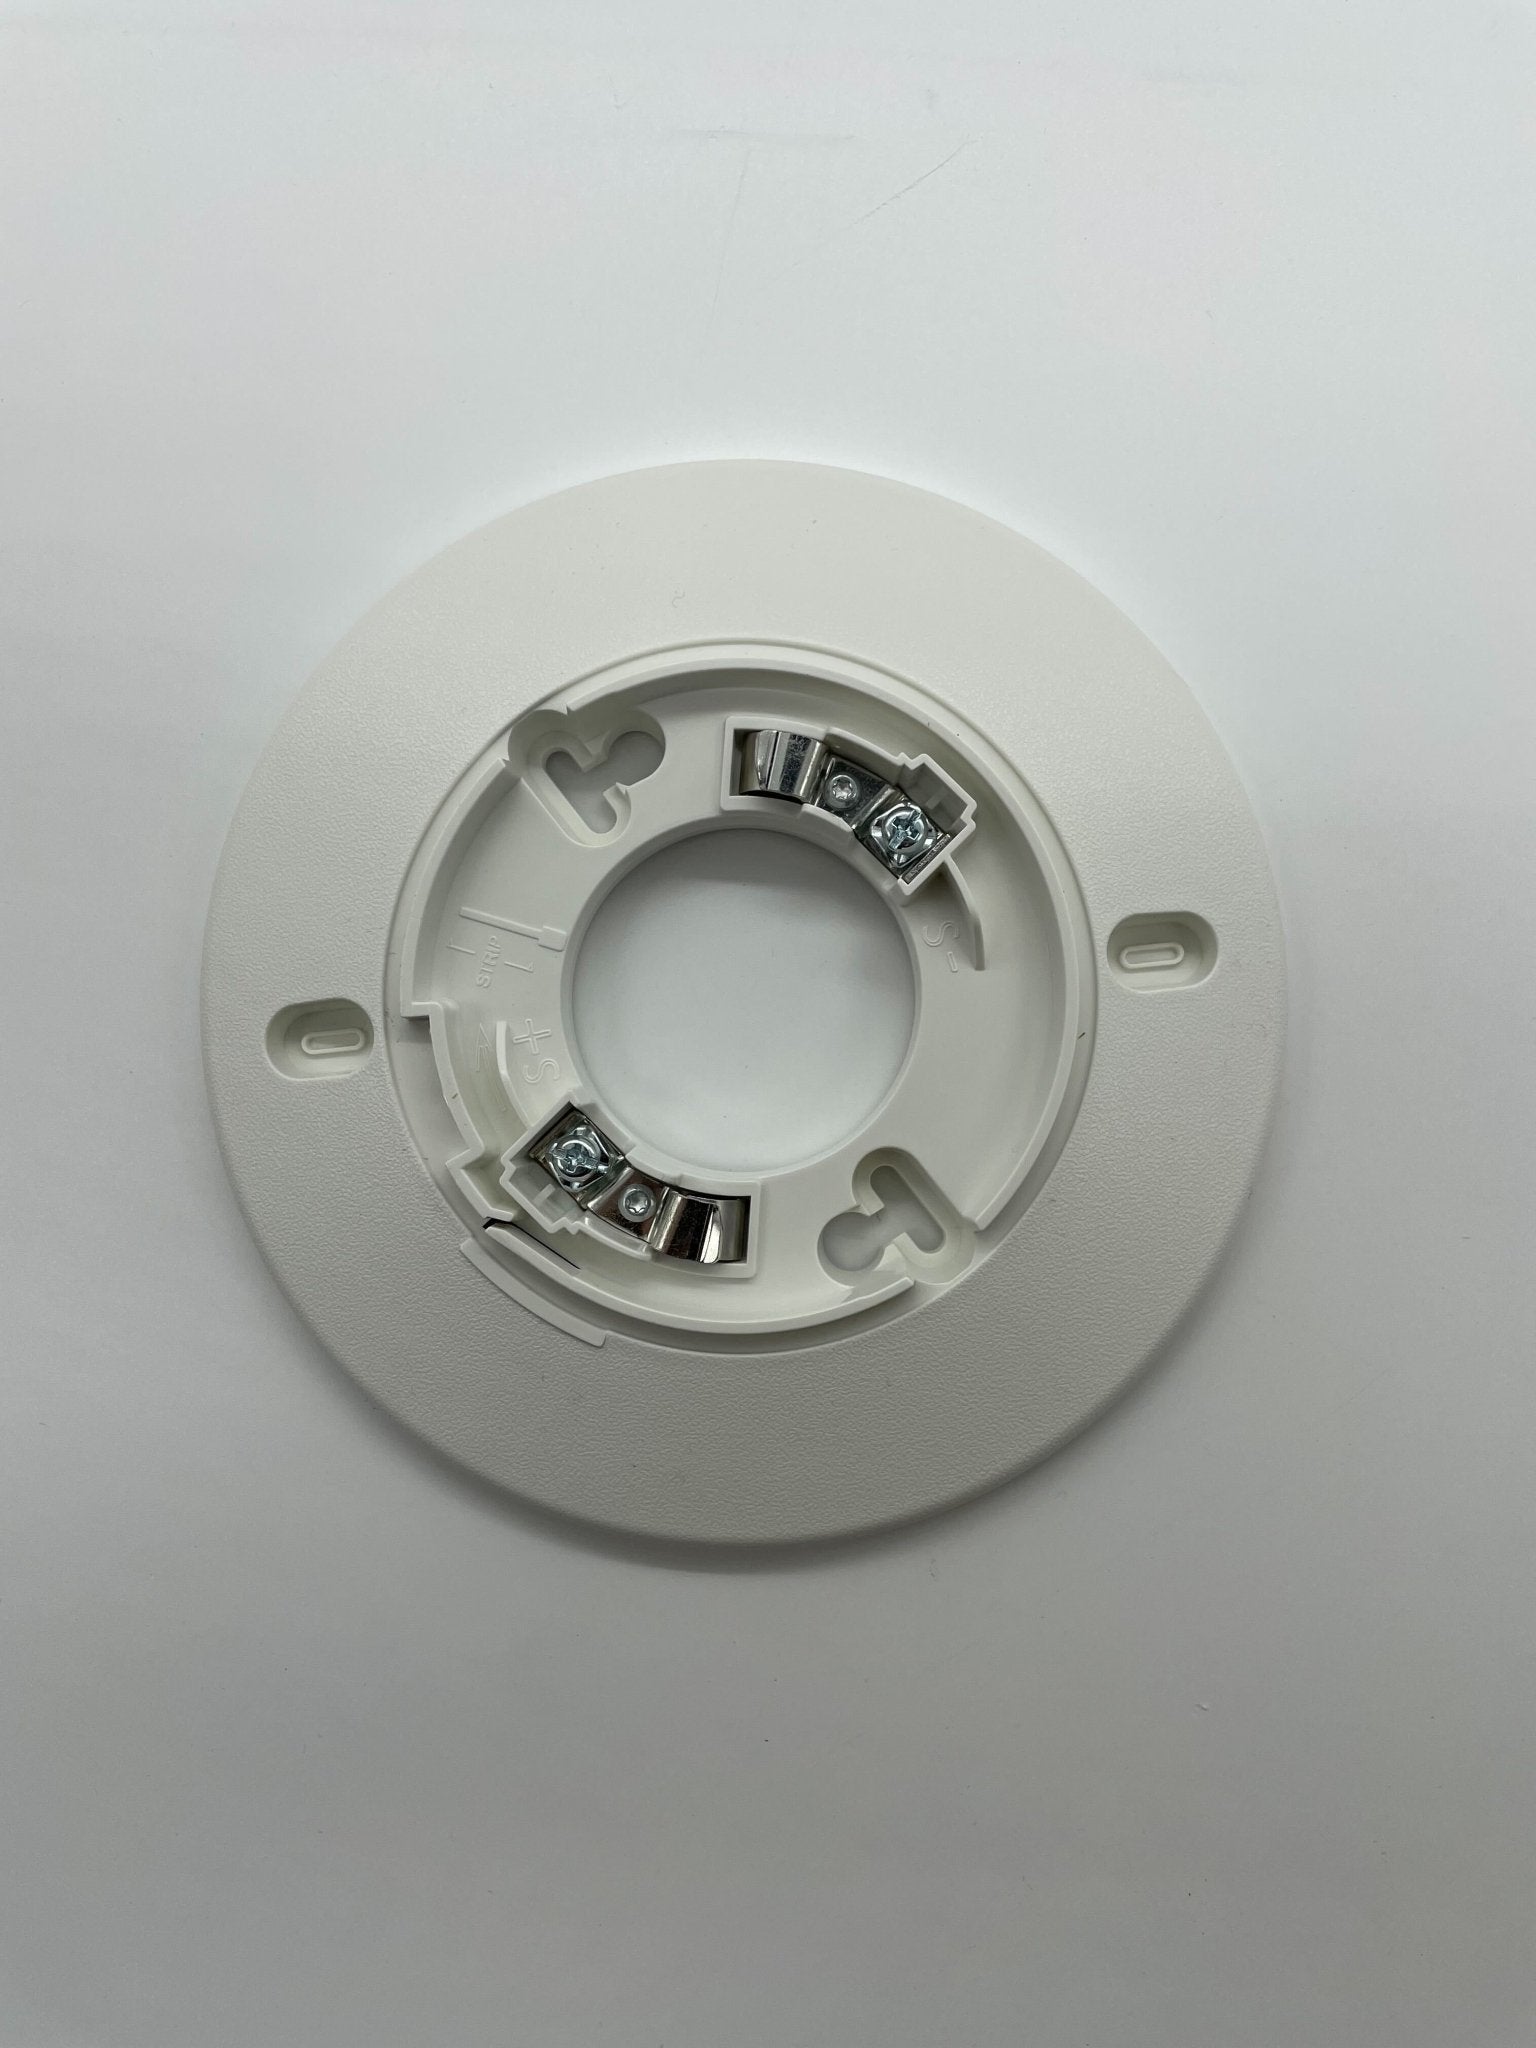 Potter PAD100-6B - The Fire Alarm Supplier